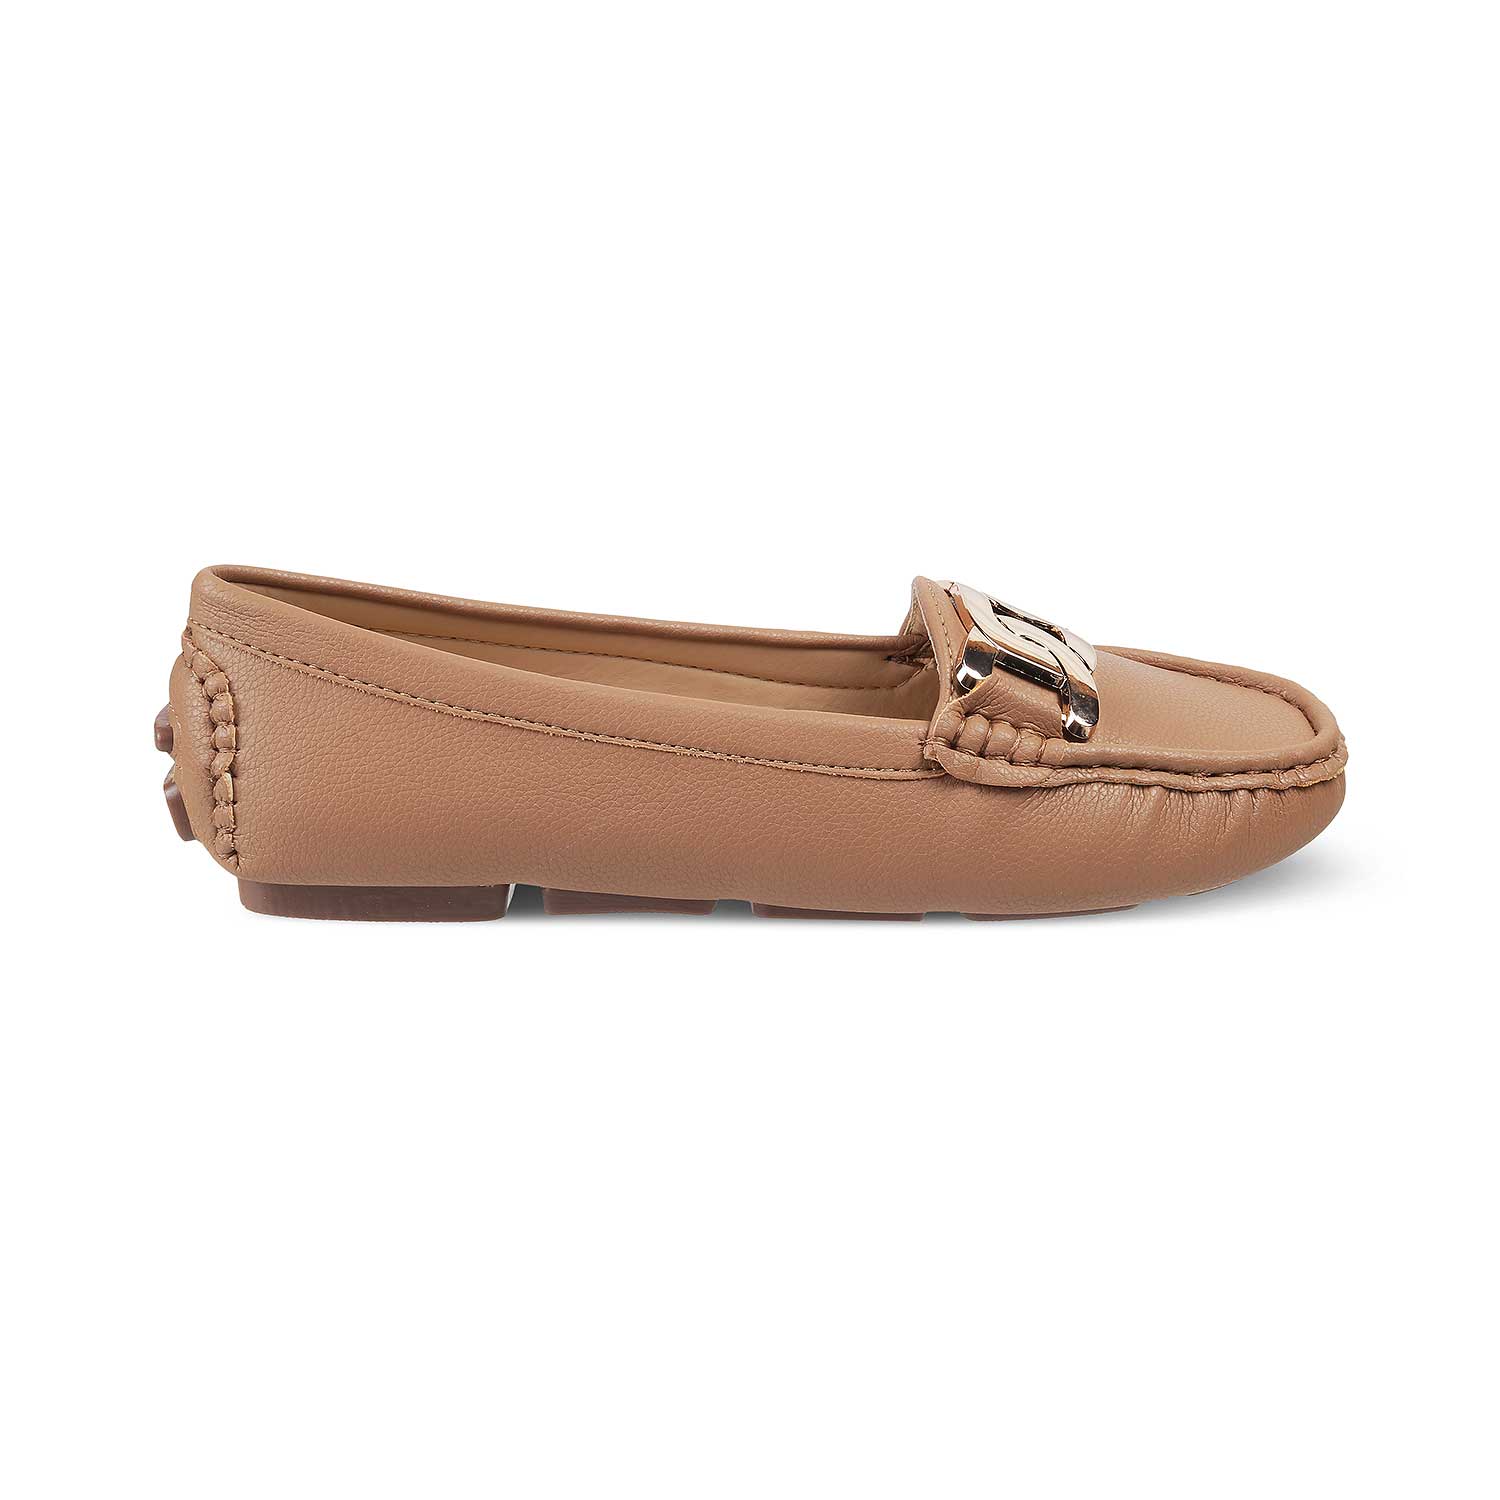 The Yon New Tan Women's Dress Loafers Tresmode - Tresmode